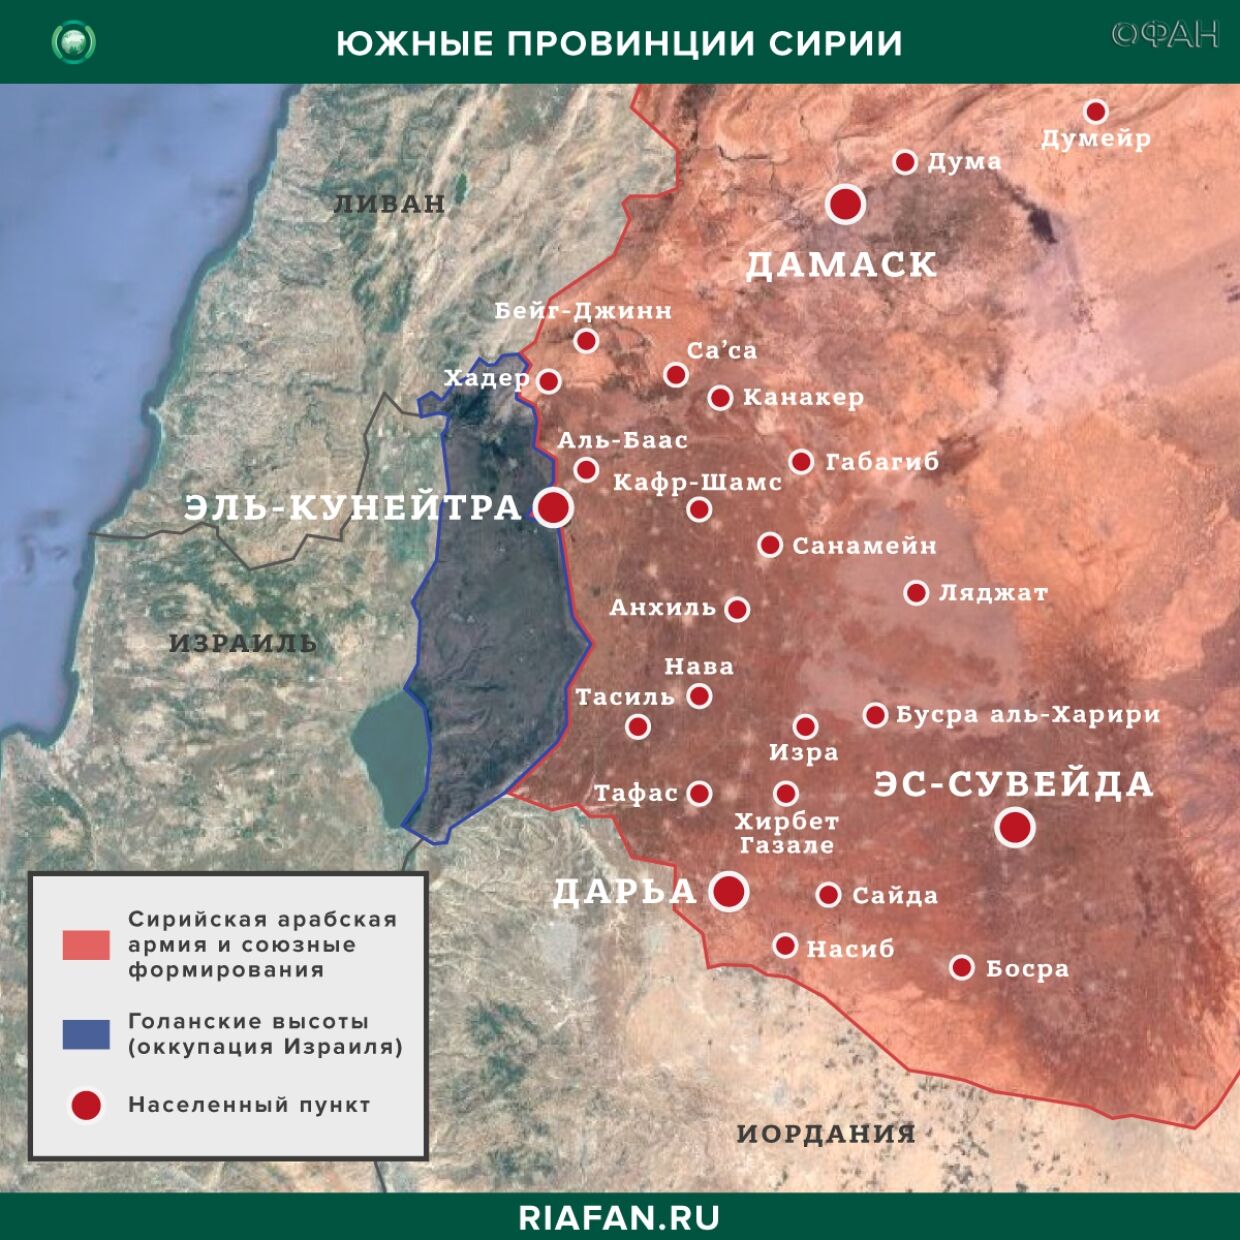 Syria the results of the day on 3 May 06.00: provocations of terrorists in Idlib, escalation of internecine conflict in the ranks of the SNA in Aleppo